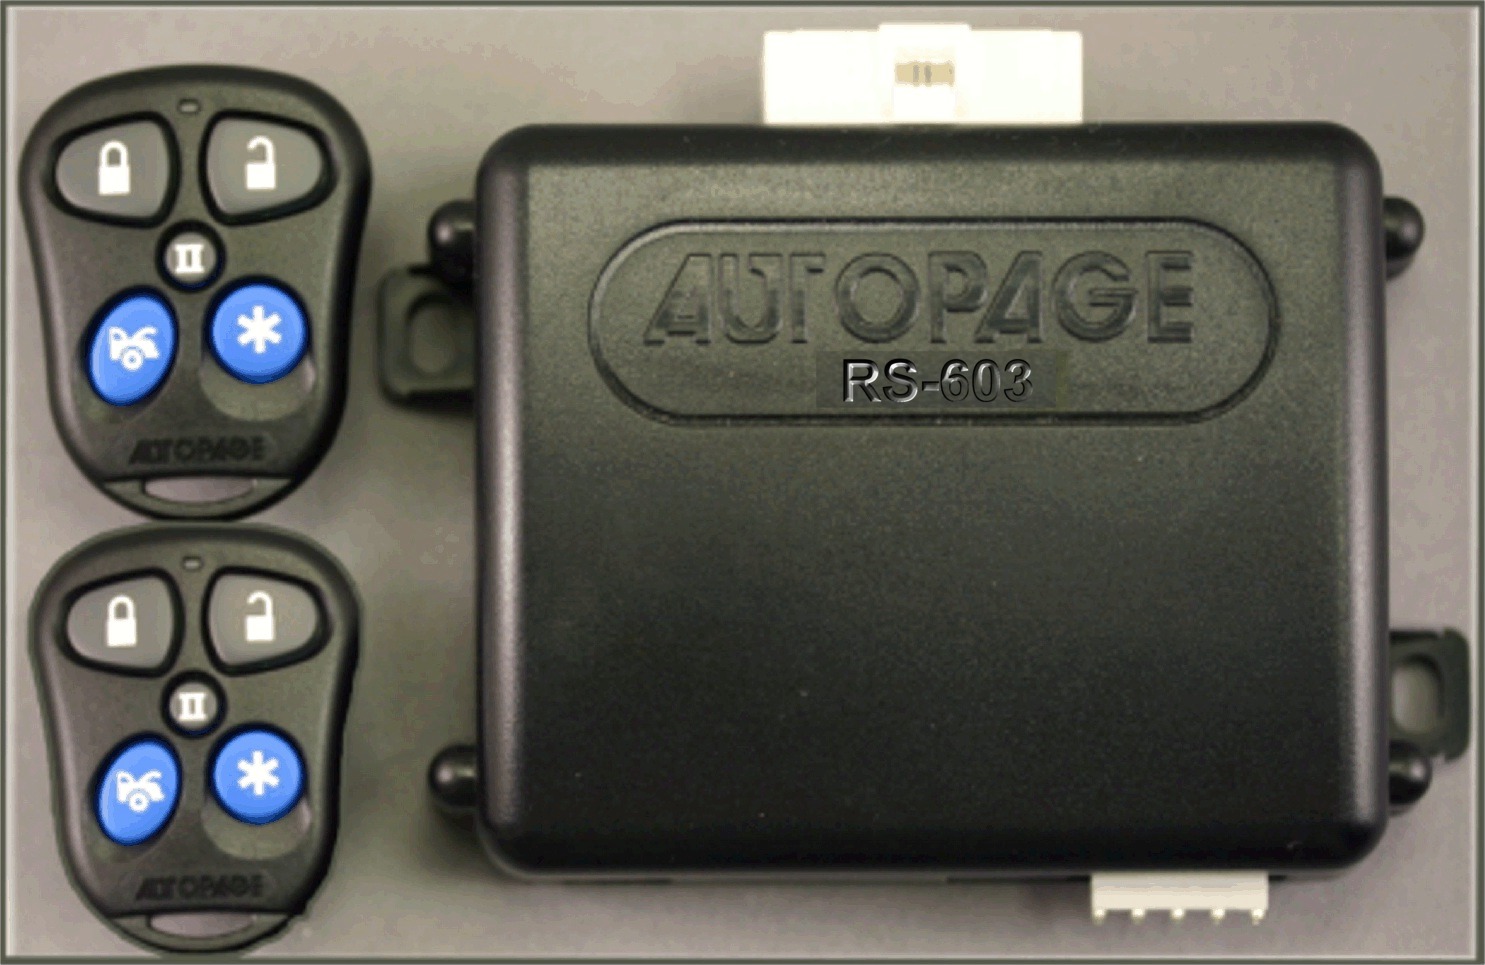 What are the features of AutoPage remote starters?